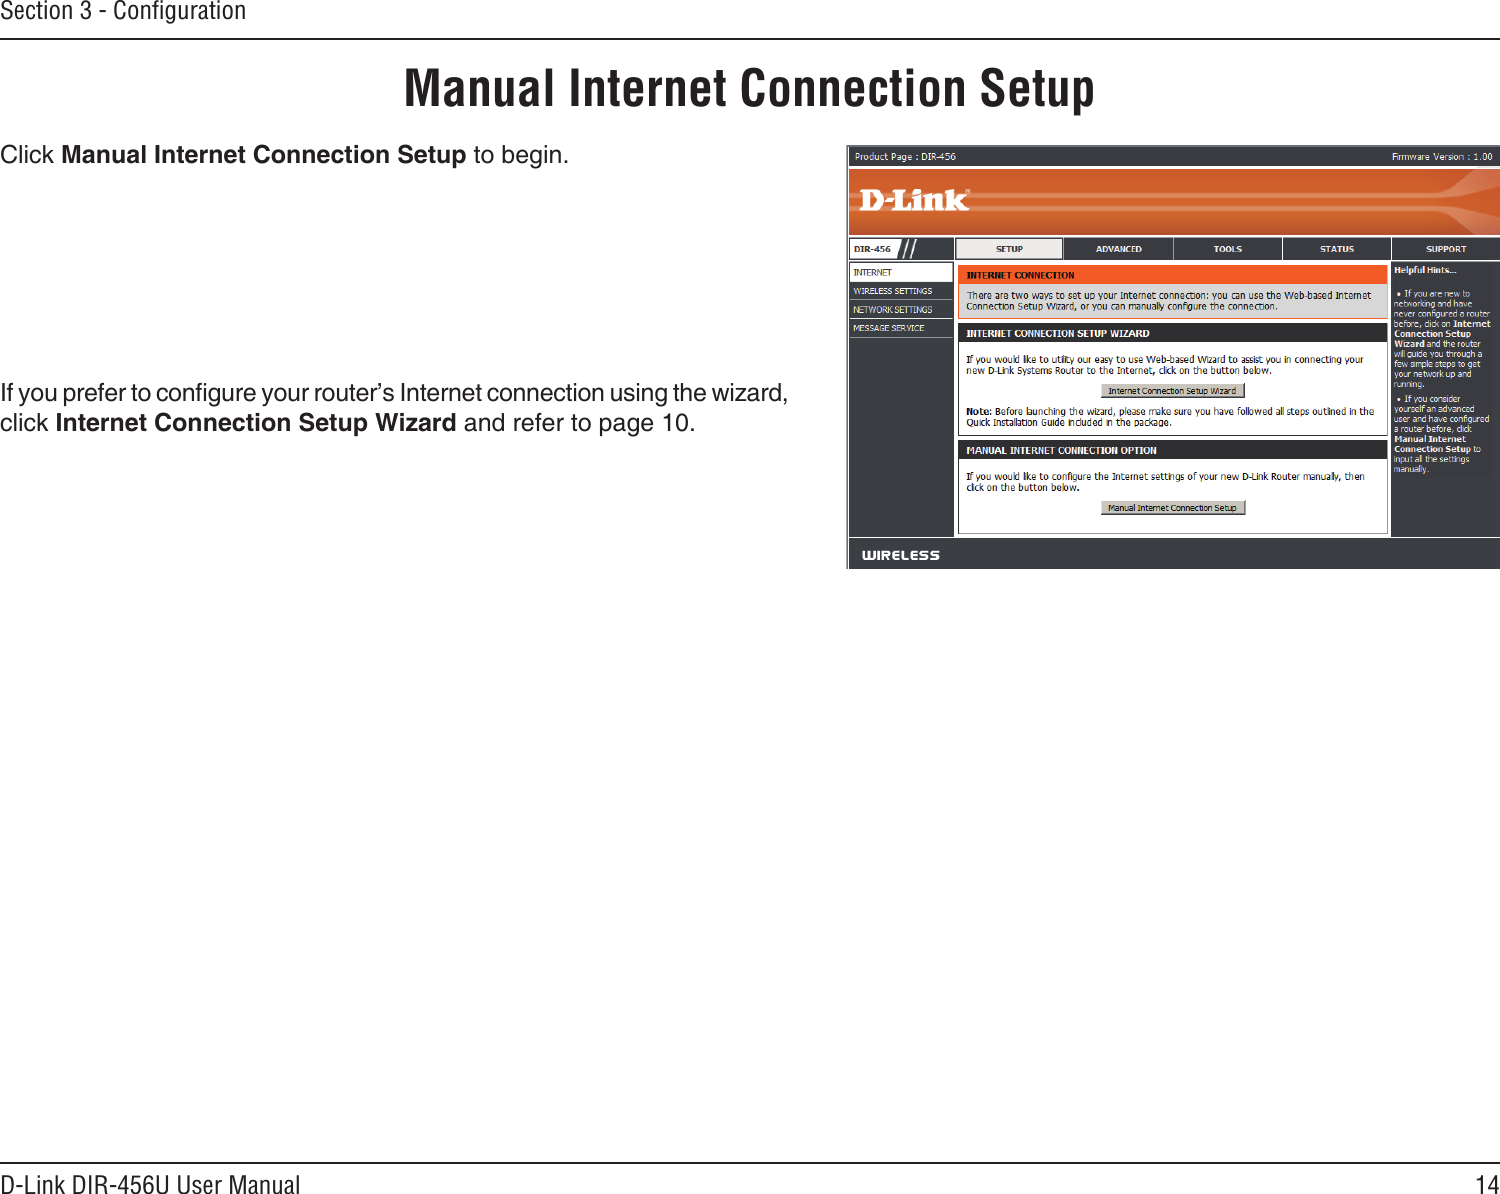 14D-Link DIR-456U User ManualSection 3 - ConﬁgurationManual Internet Connection SetupClick Manual Internet Connection Setup to begin.If you prefer to congure your router’s Internet connection using the wizard, click Internet Connection Setup Wizard and refer to page 10.